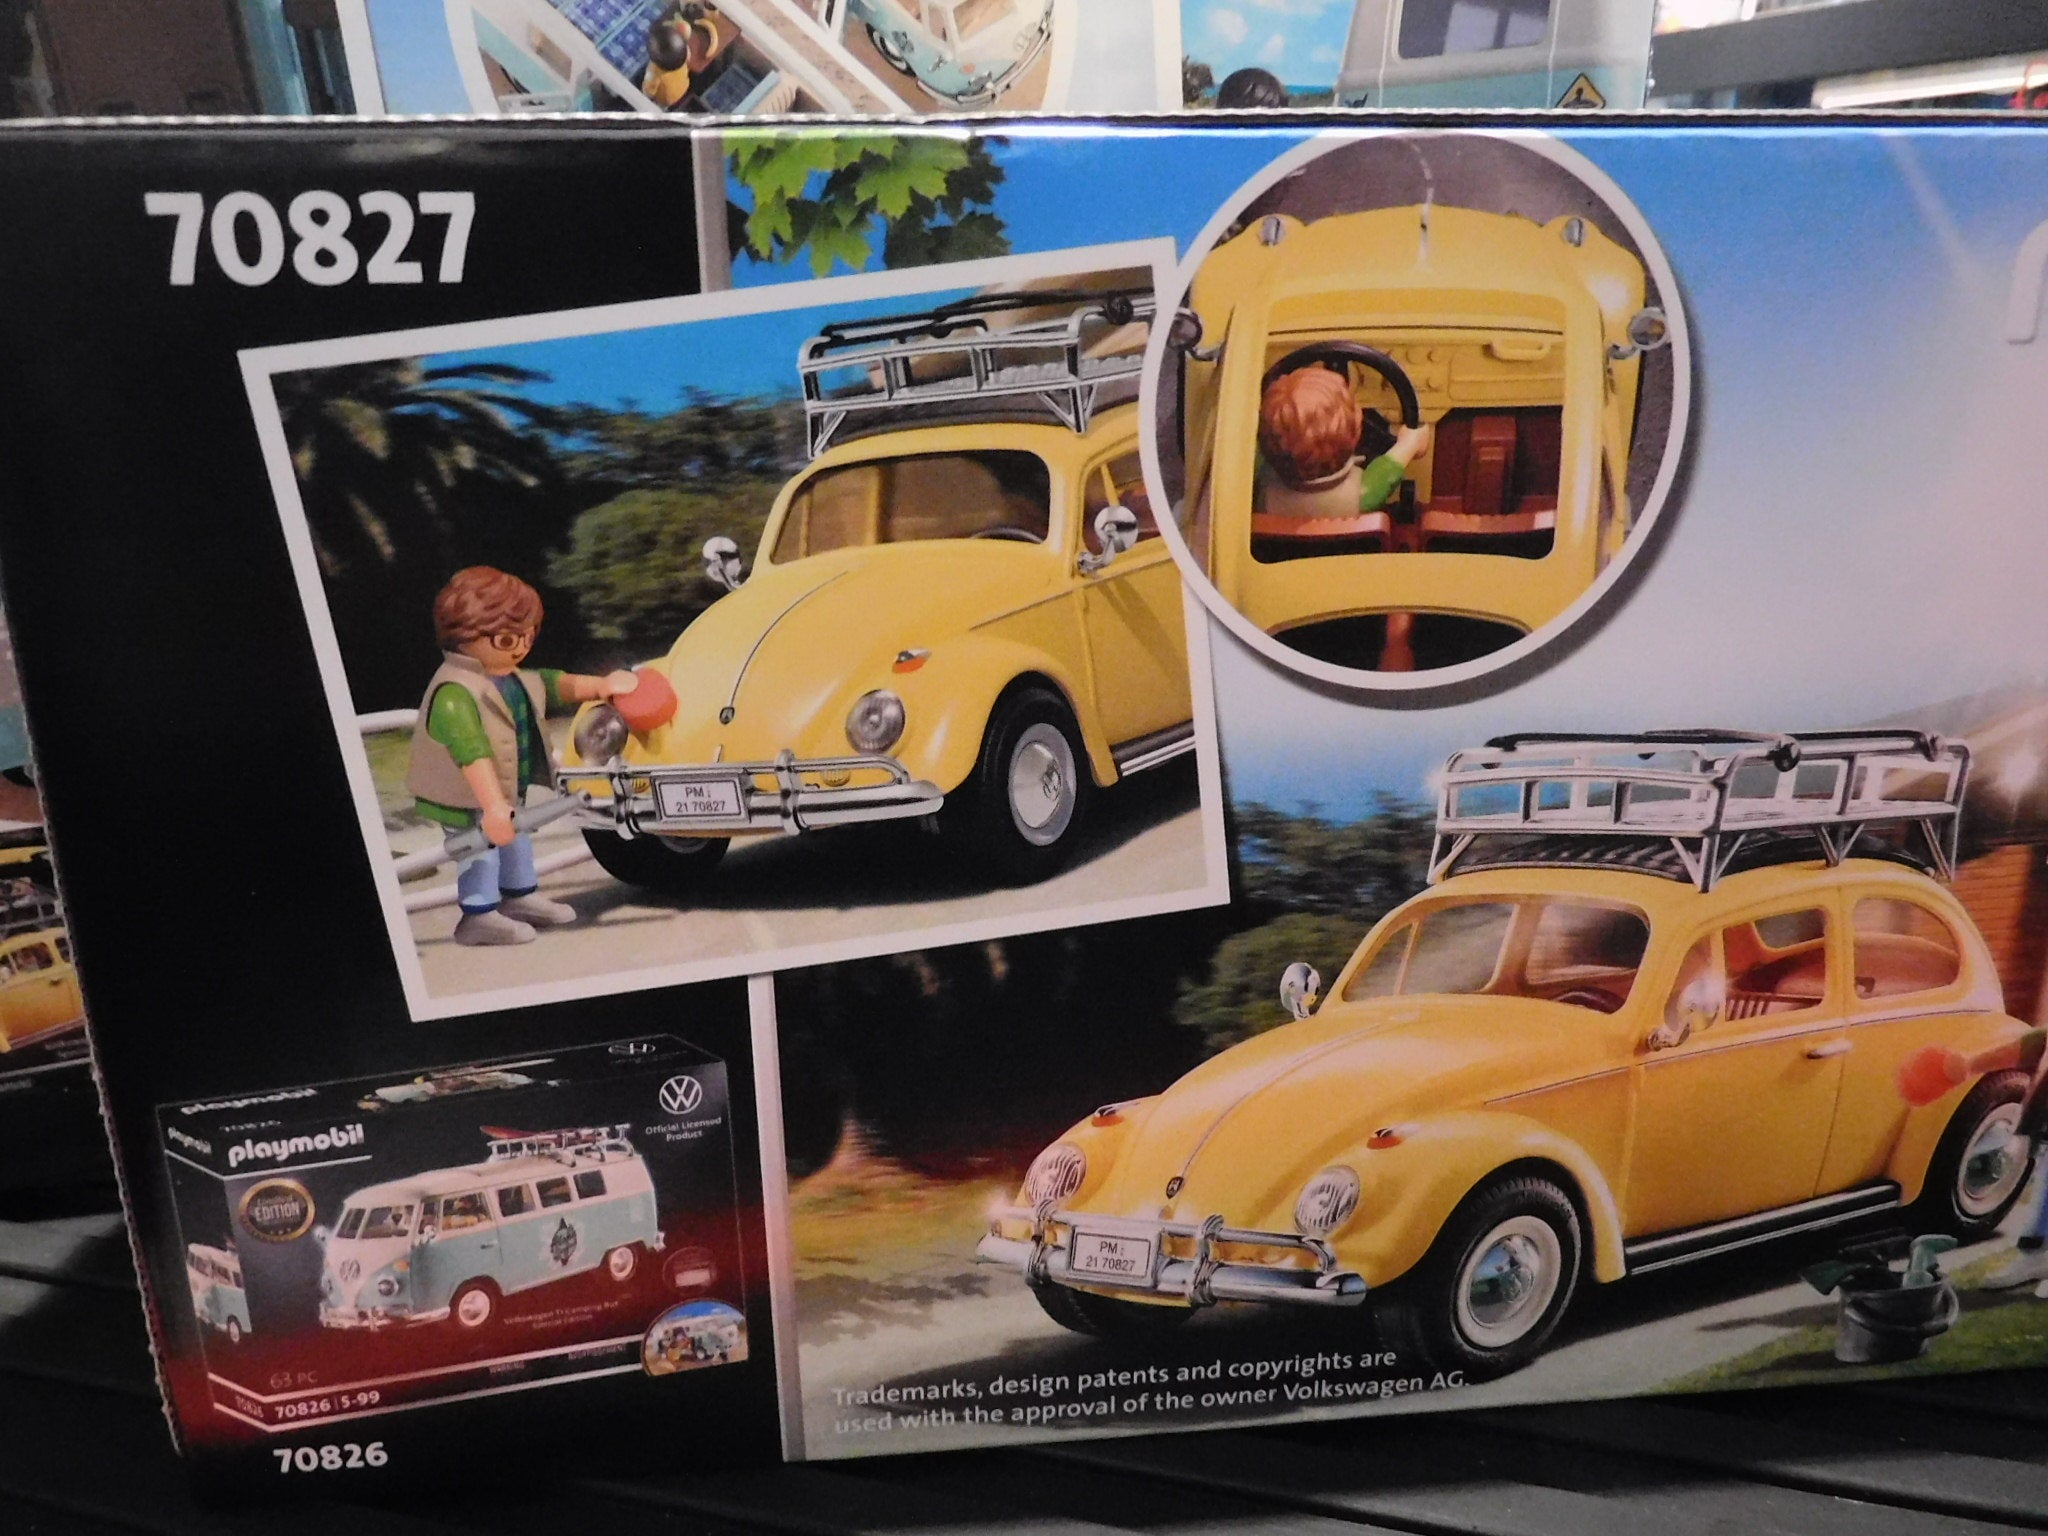 PLAYMOBIL CLASSIC VOLKSWAGEN BEETLE ( LIMITED EDITION )